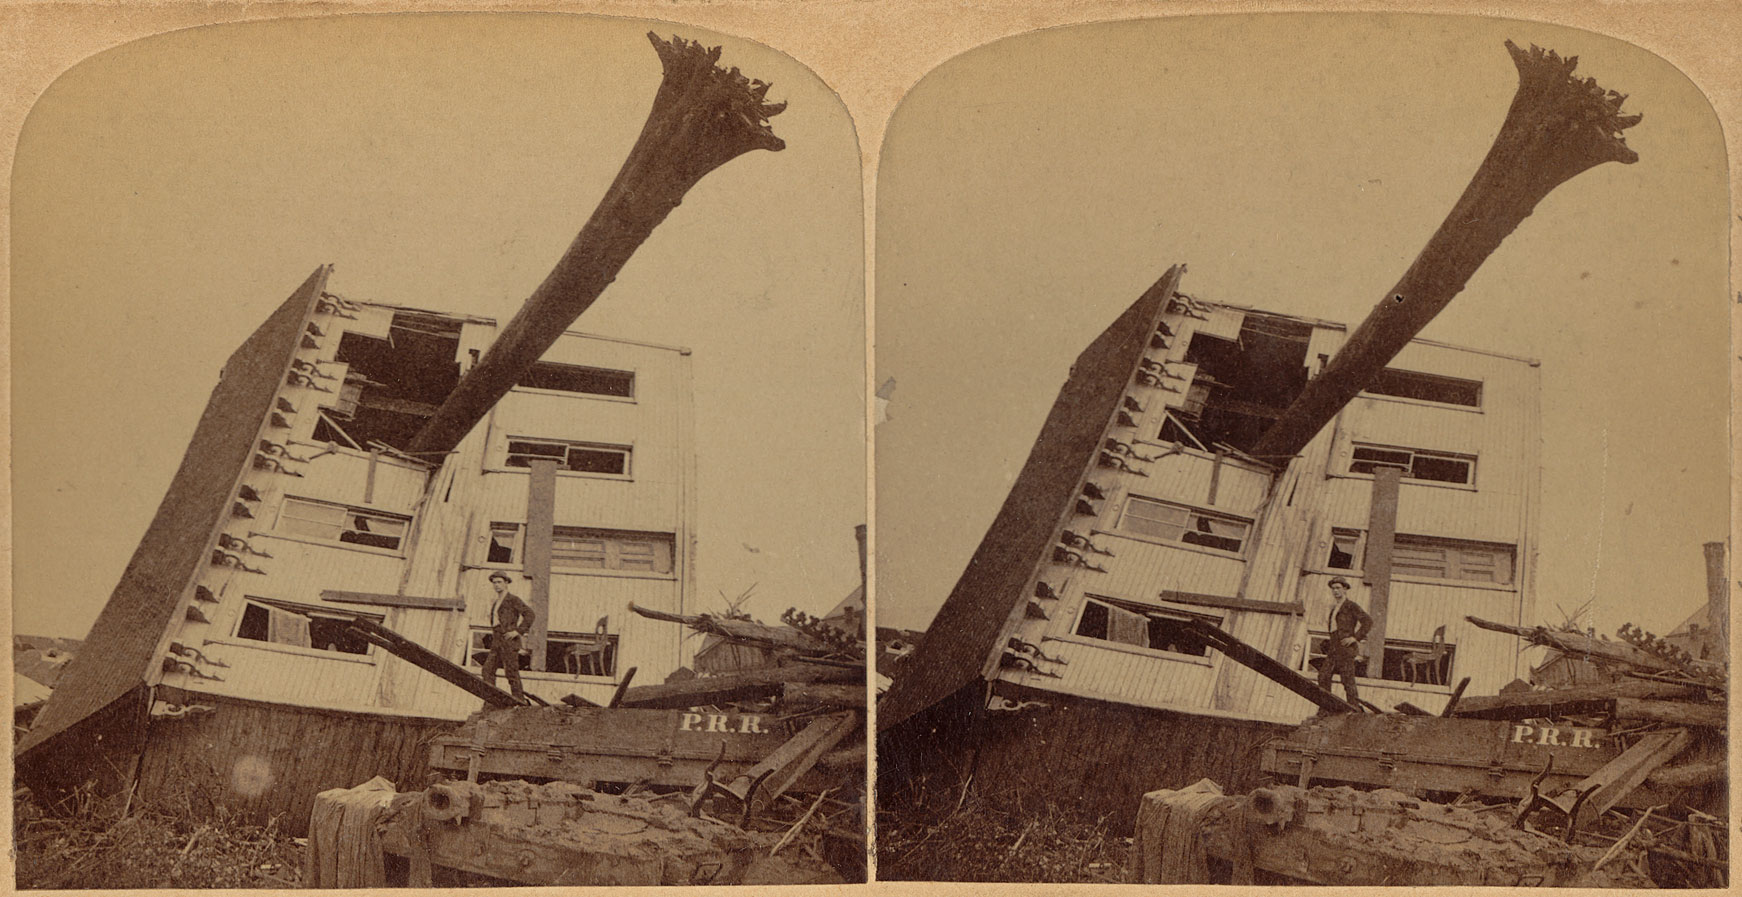 Stereopair (pair of nearly identical photographs placed side by side) showing a house destroyed by the 1899 Johnstown flood in Pennsylvania. The photo shows a house lying on its side with a large tree sticking out of one of the windows of the upper floor, the base of the trunk in the air. A man poses on a pile of debris in front of the house. The image is sepia.